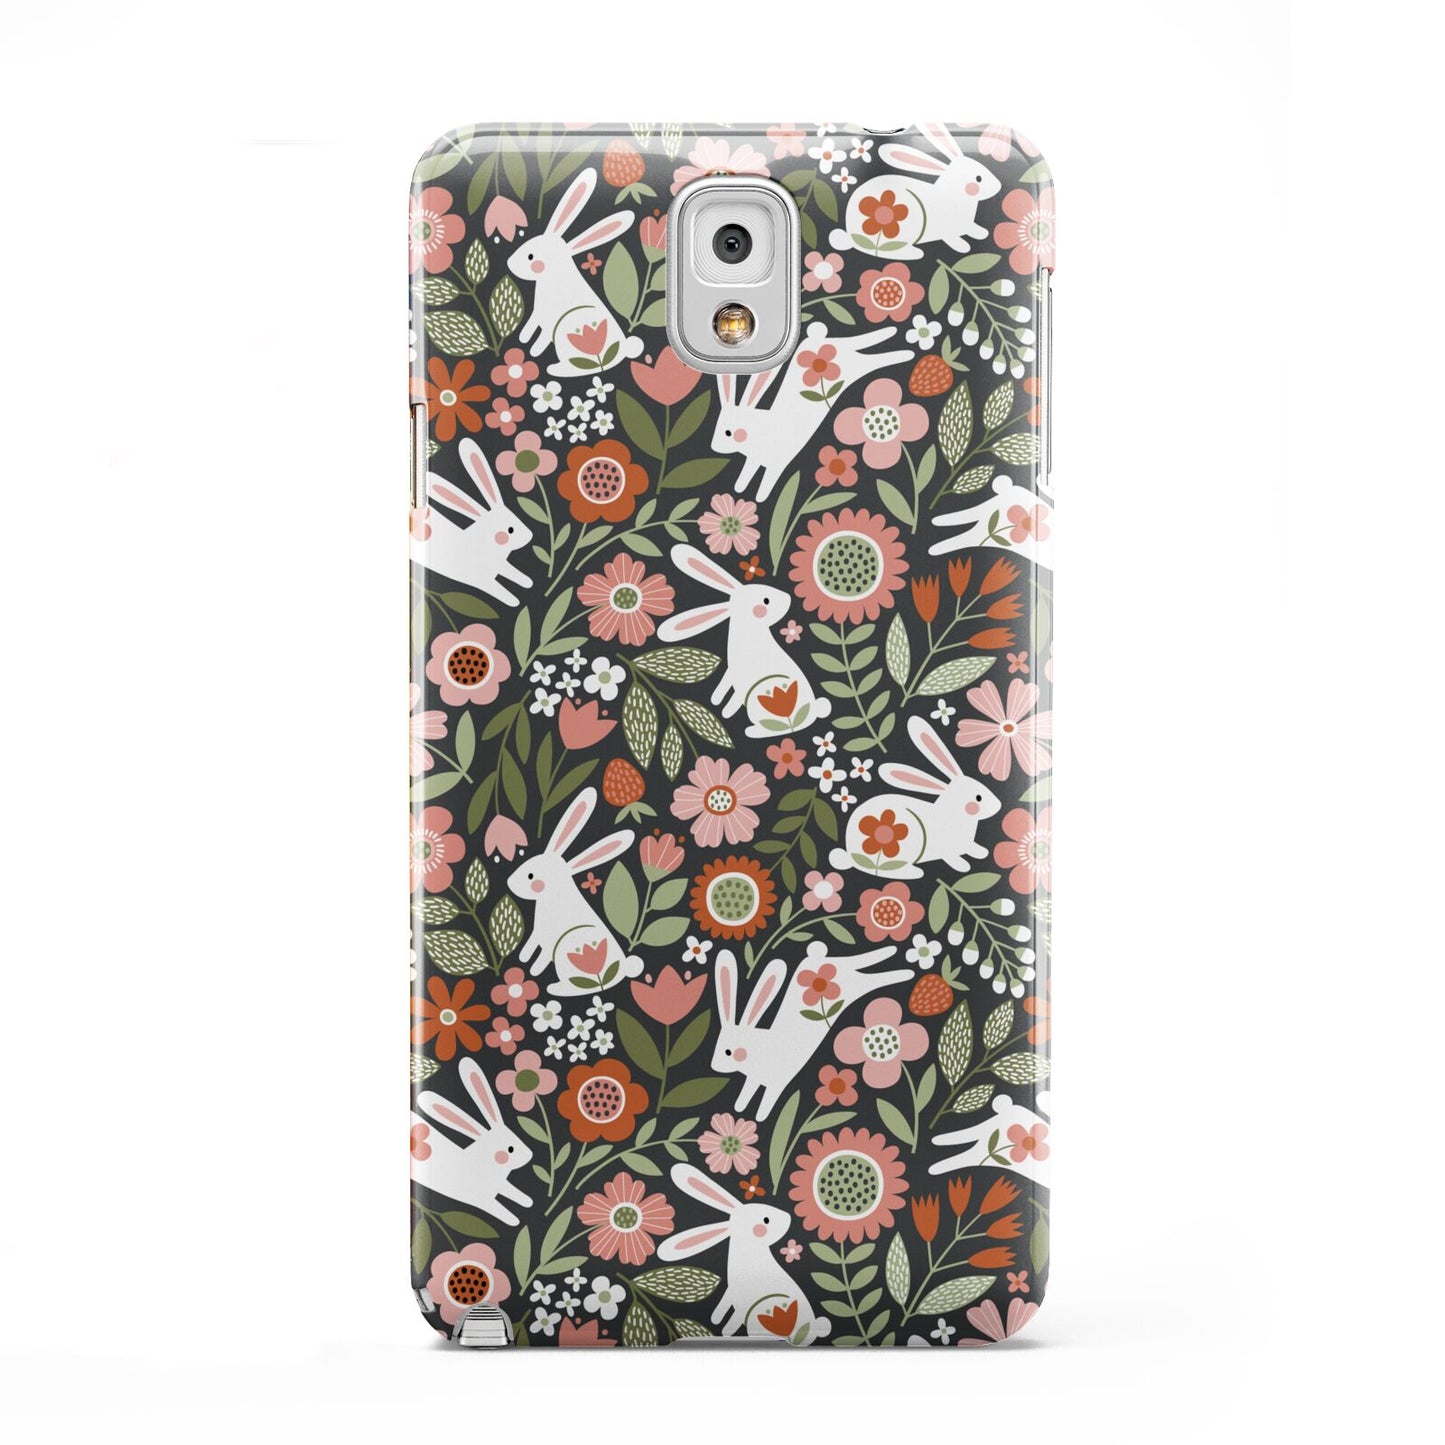 Easter Floral Samsung Galaxy Note 3 Case